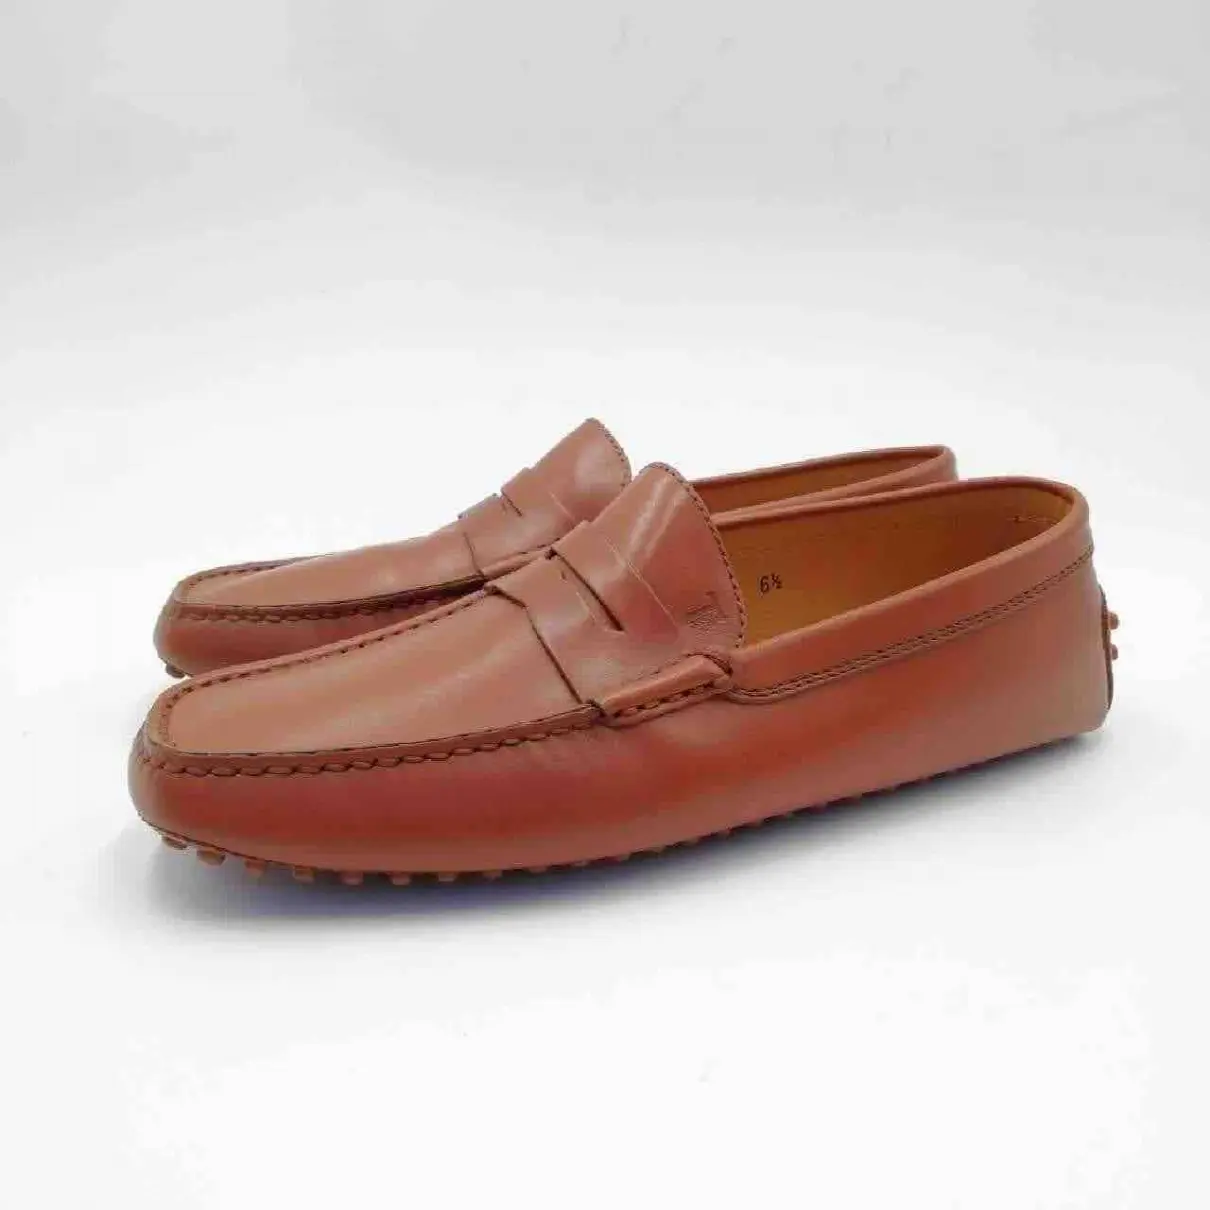 Buy Tod's Gommino leather flats online